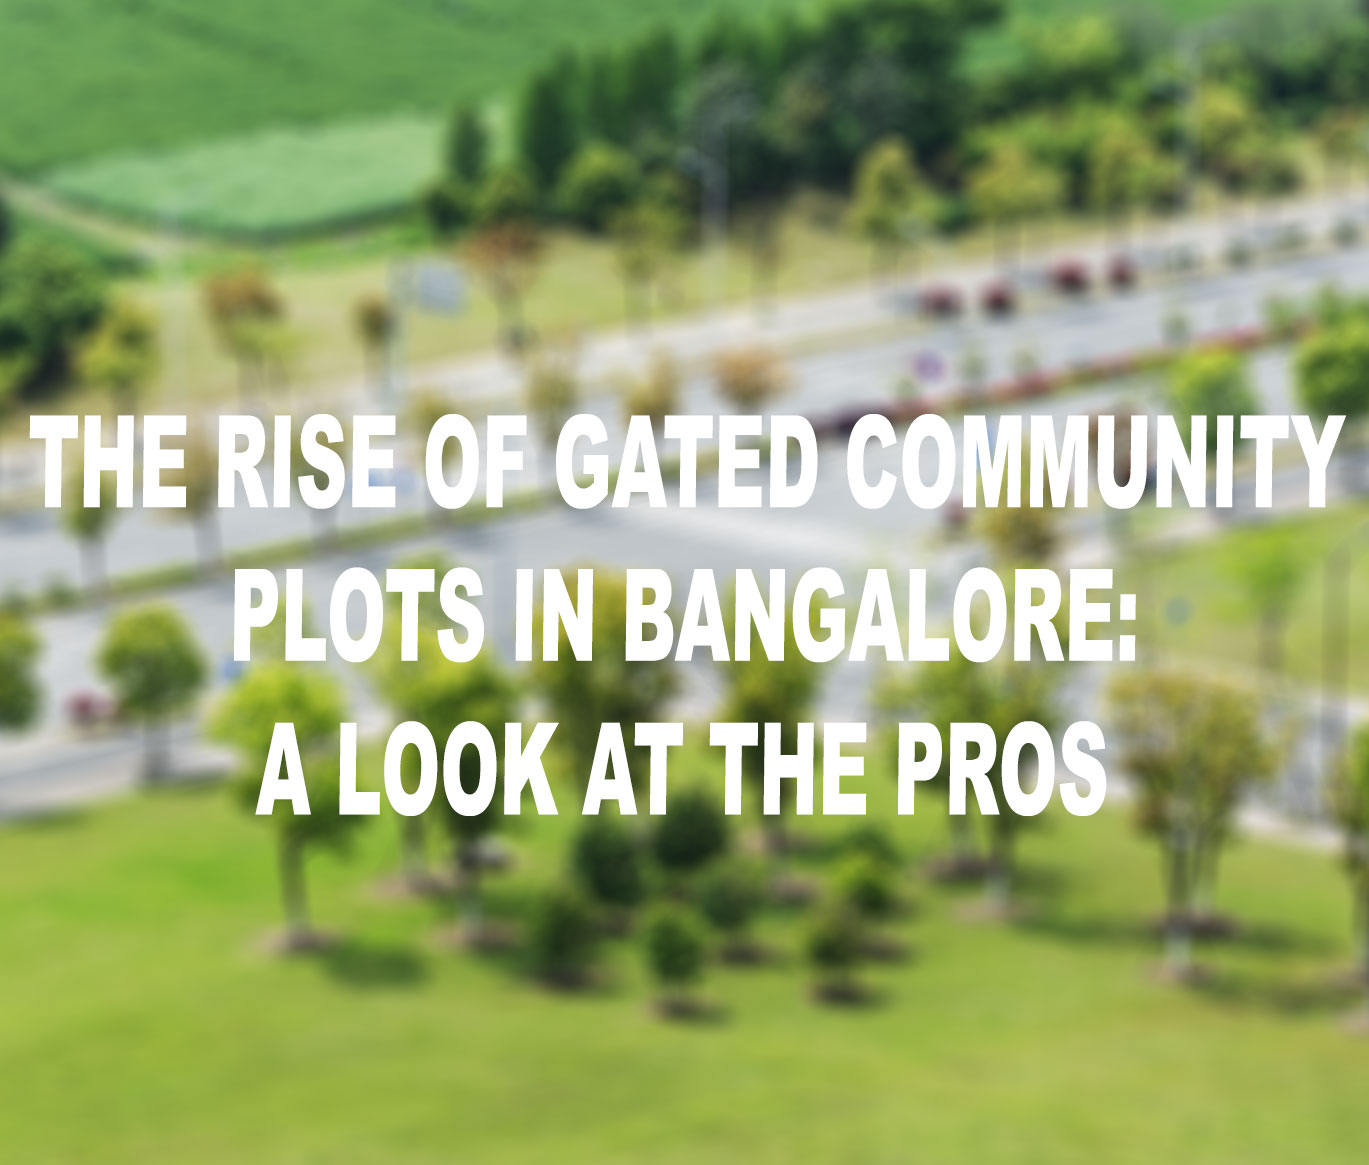 The Rise of Gated Community plots in Bangalore: A Look at the Pros